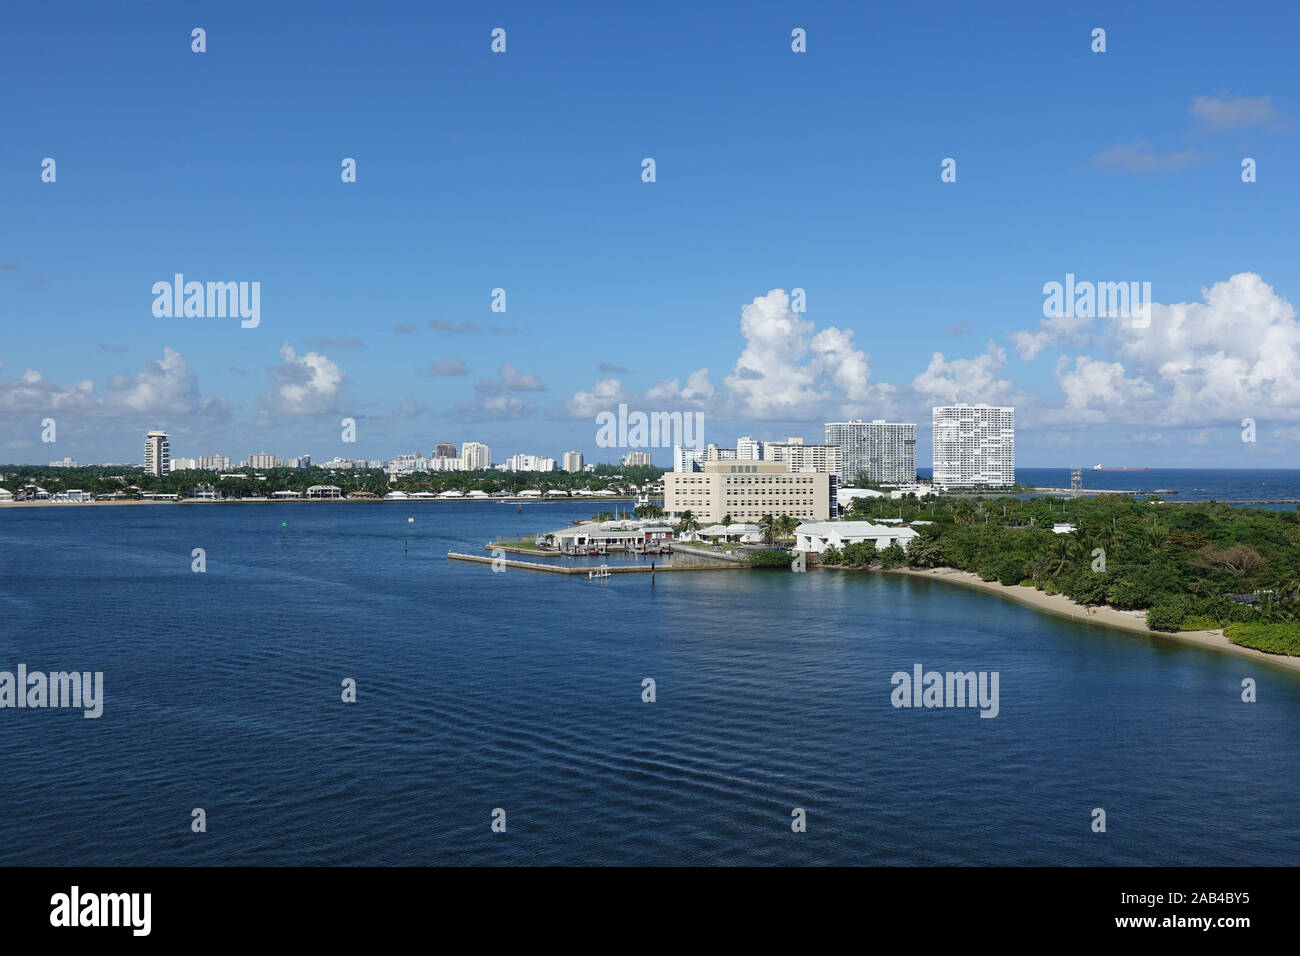 Ft. Lauderdale, FL/USA-10/31/19: The view from a cruise ship of Port Everglades, in Ft. Lauderdale, Florida of the channel out to the ocean. Stock Photo